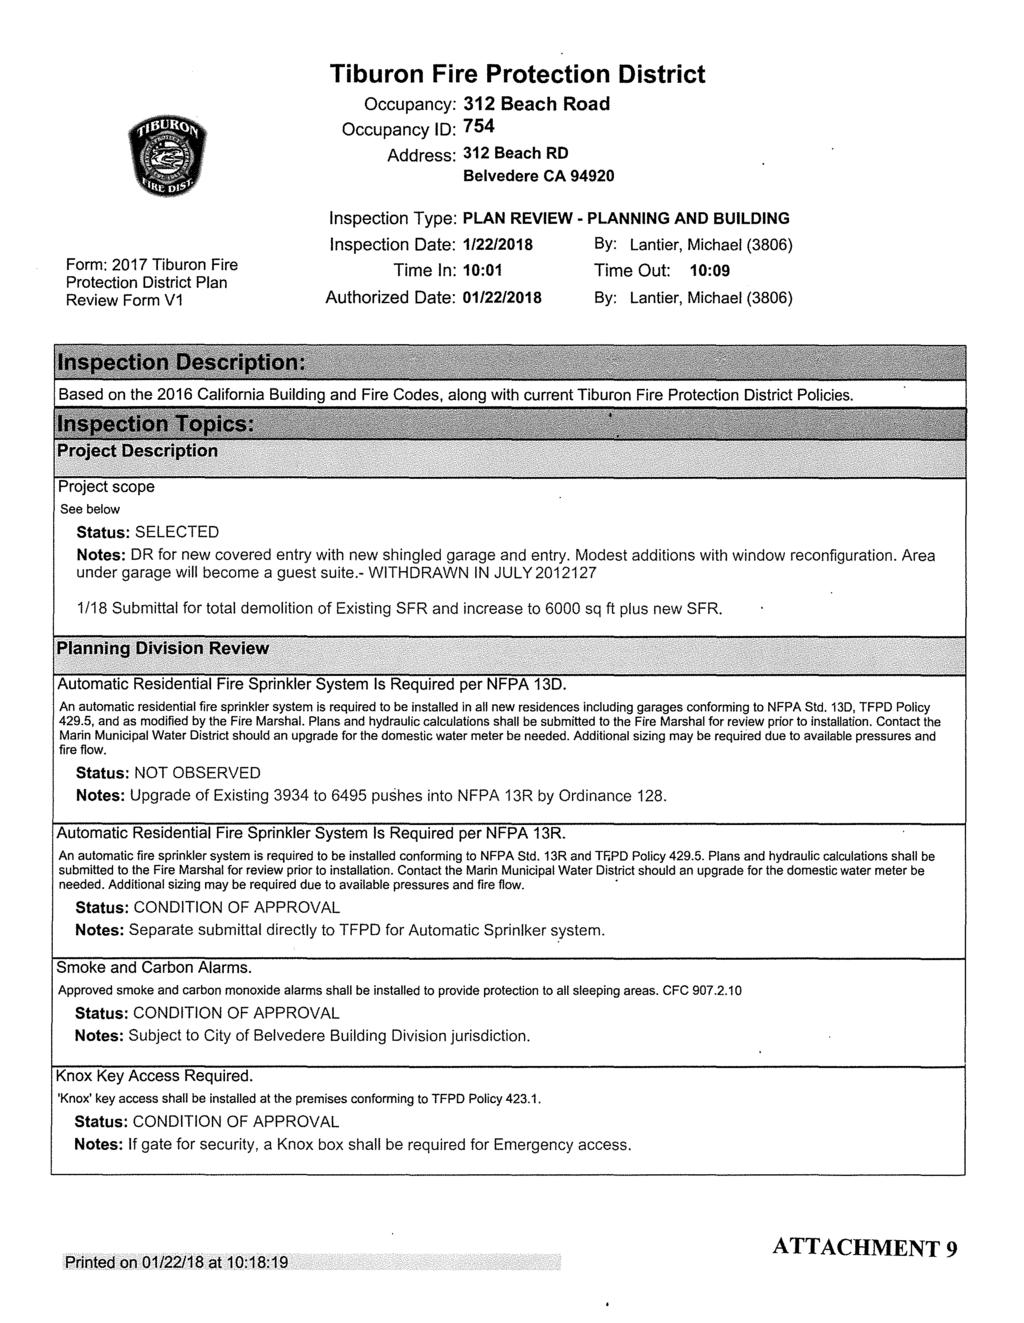 Tiburon Fire Protection District Occupancy: 312 Beach Road Occupancy ID: 754 Address: 312 Beach RD Belvedere CA 94920 Inspection Type: PLAN REVIEW - PLANNING AND BUILDING Form: 2017 Tiburon Fire